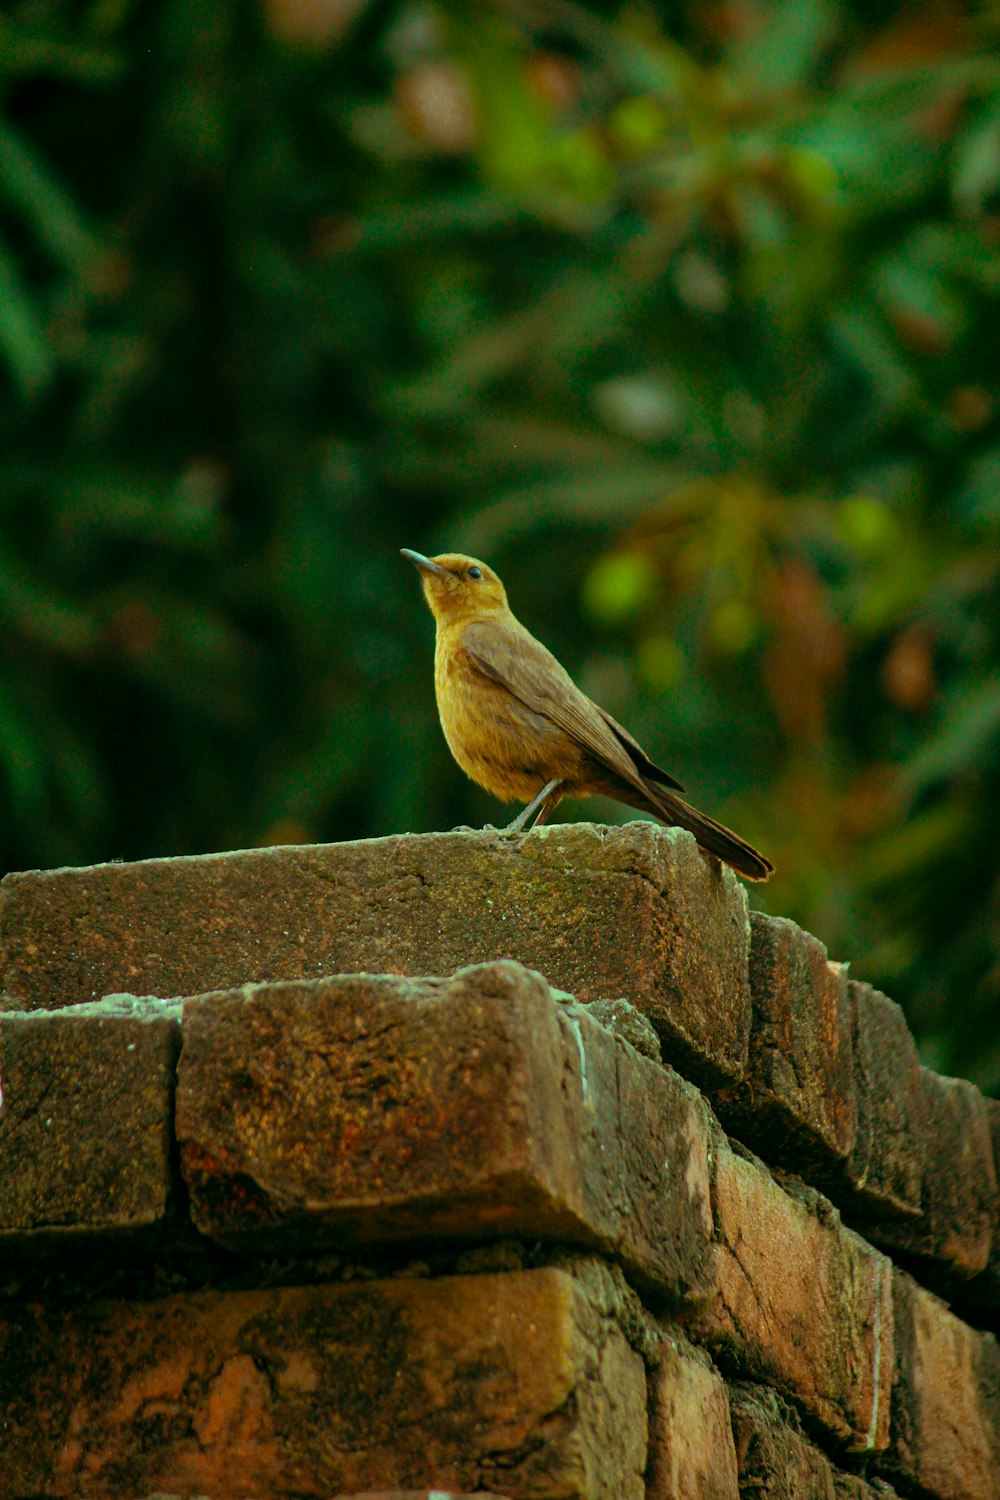 a small bird sitting on top of a brick wall